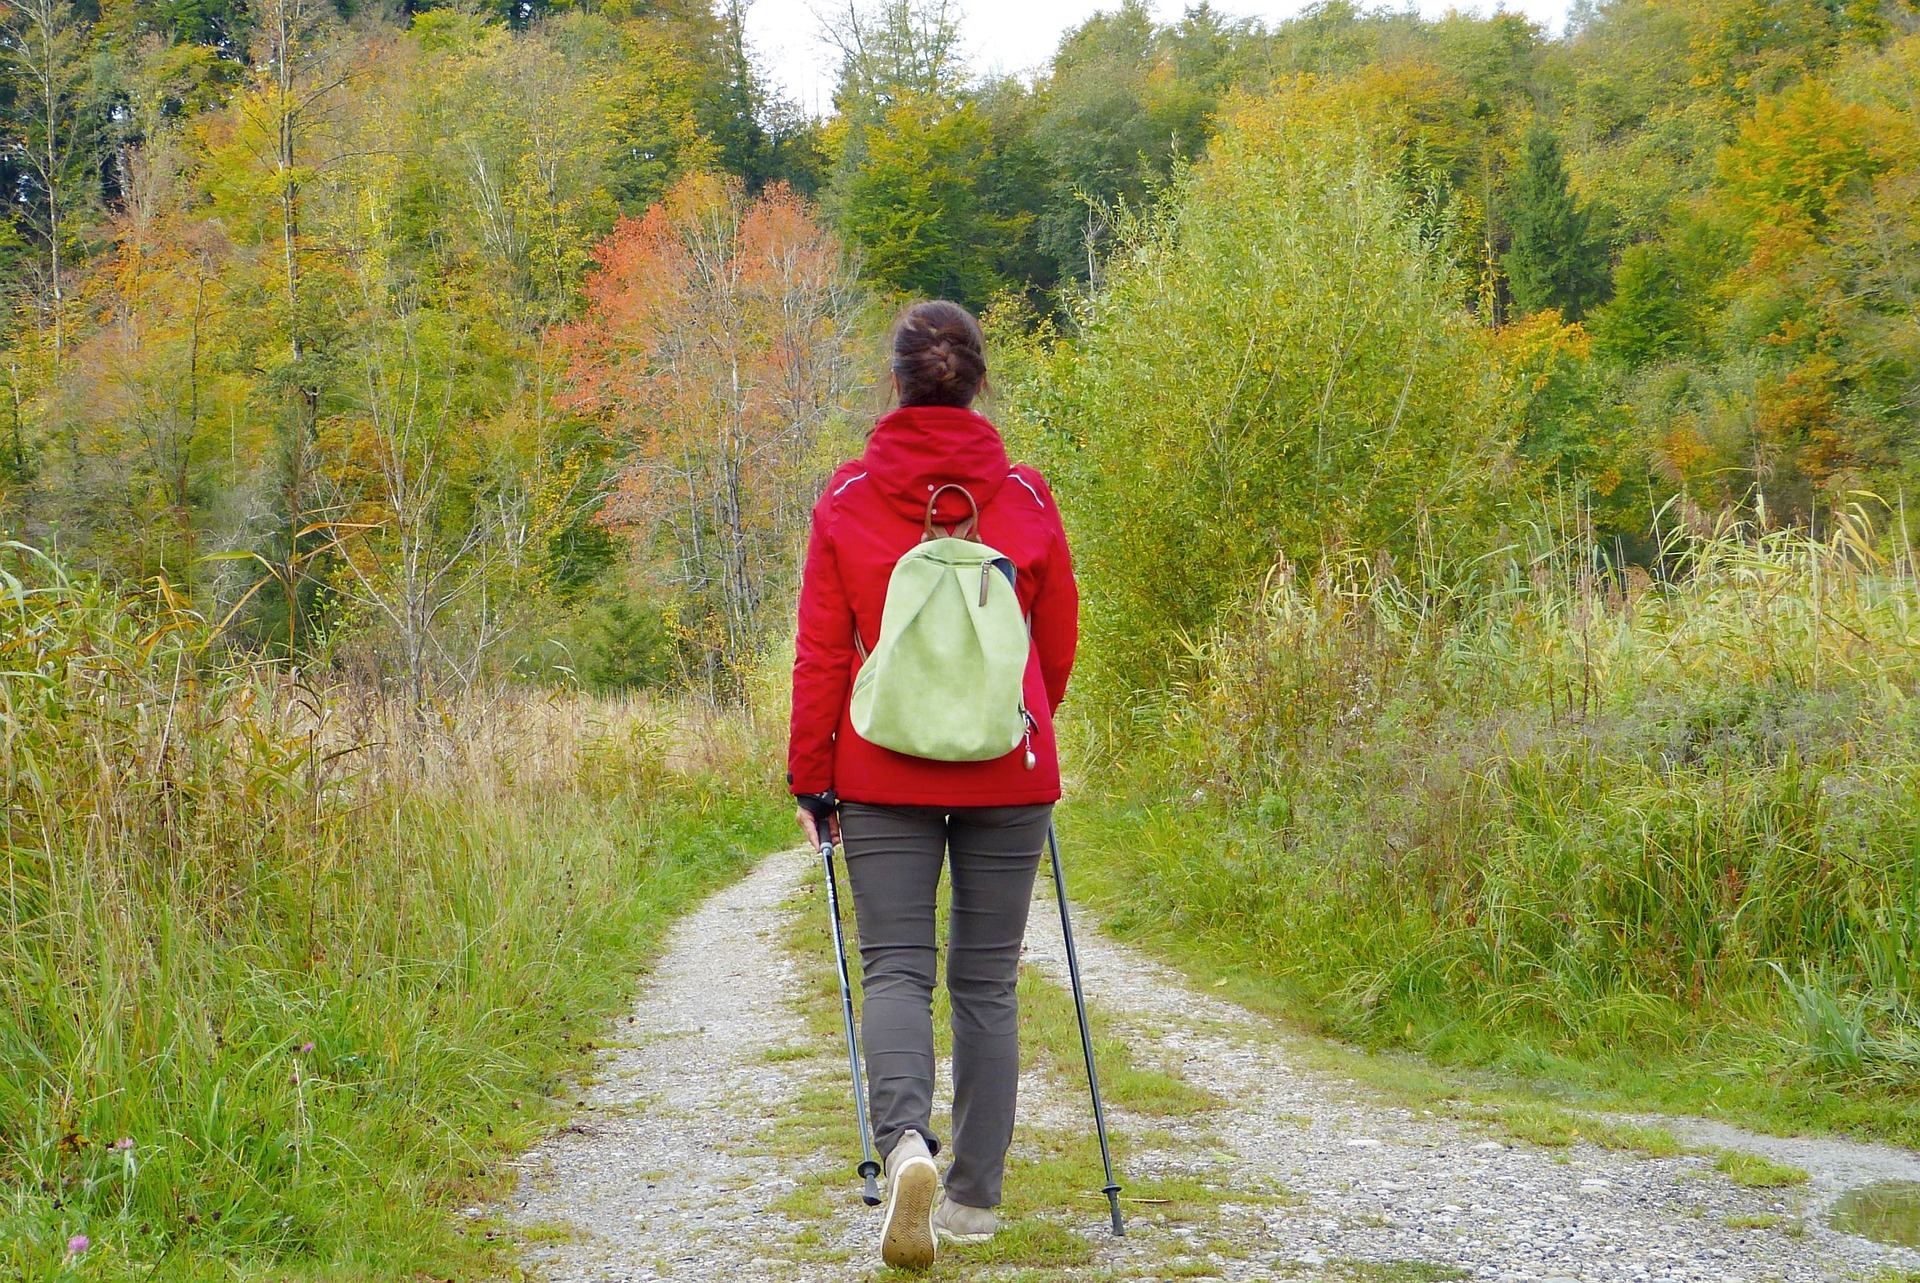 Rear view of woman hiking on trail through a field